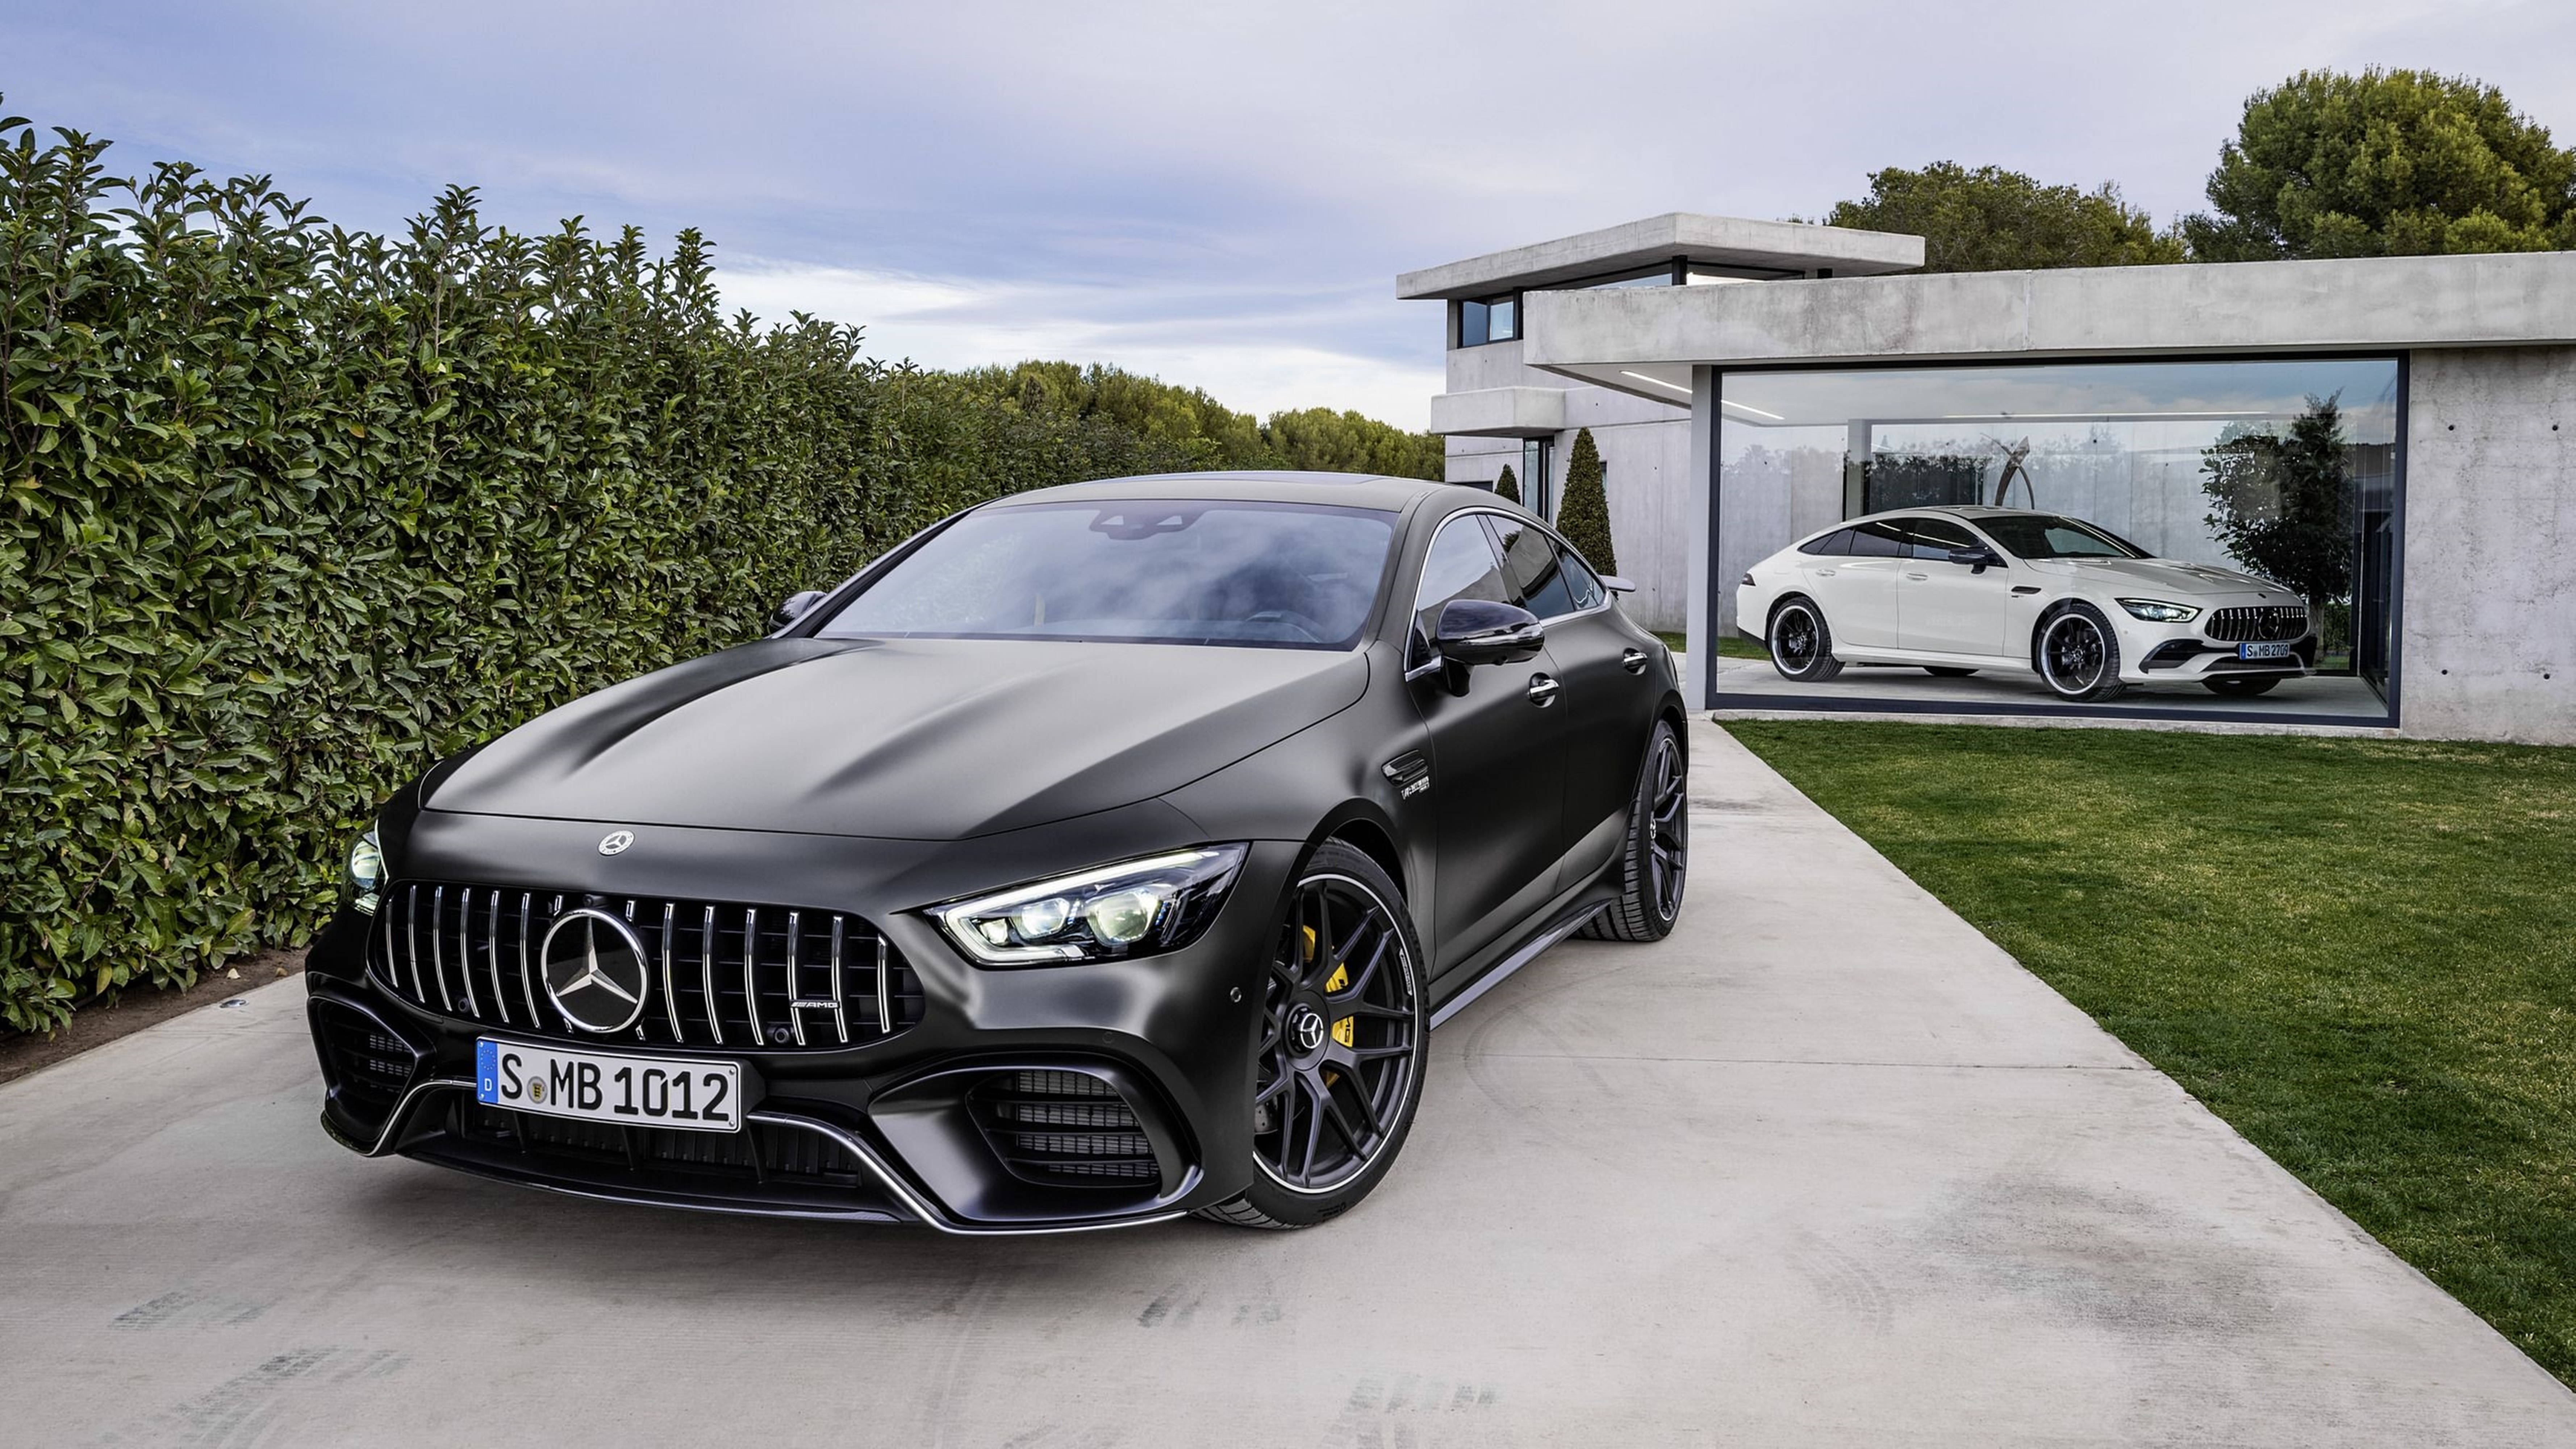 Exuding Power And Class: The Stunning Mercedes Amg In 4k